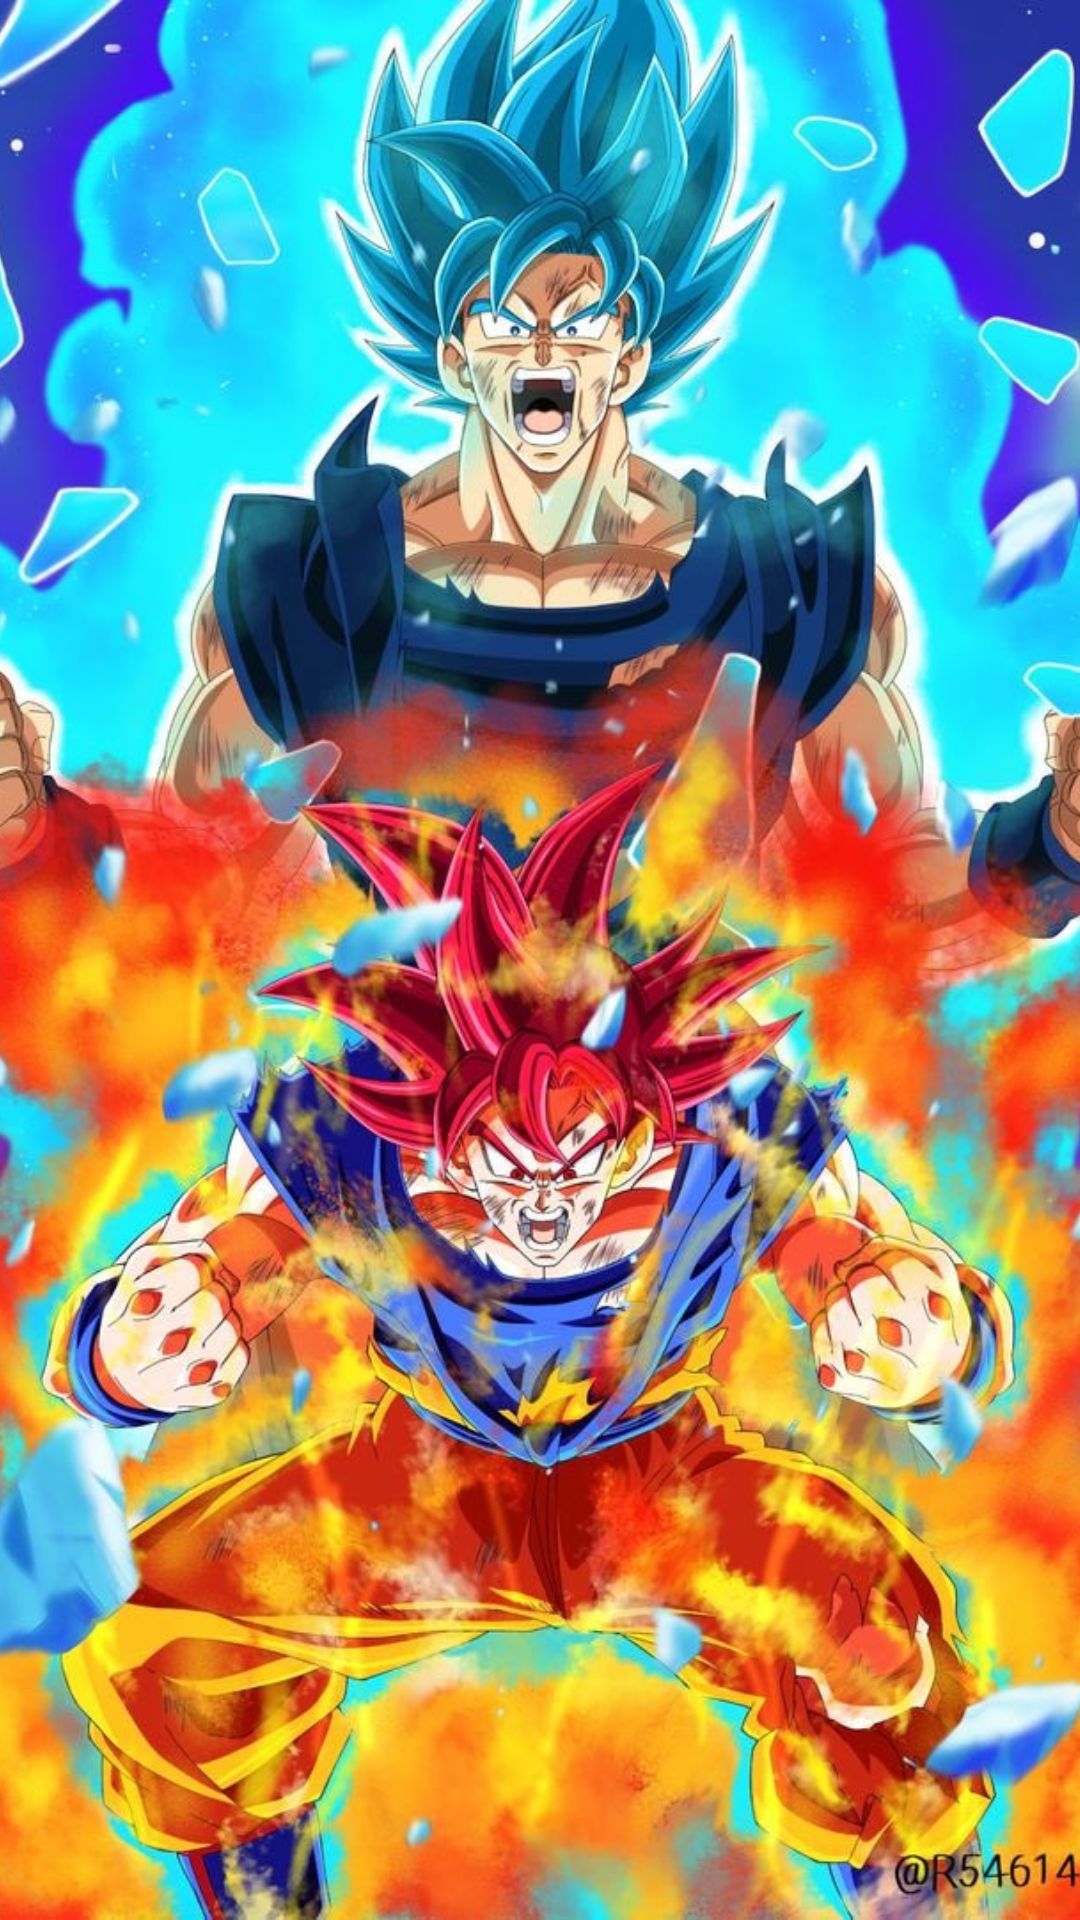 Download Dragon Ball Z wallpapers for iPhone in 2023 - iGeeksBlog